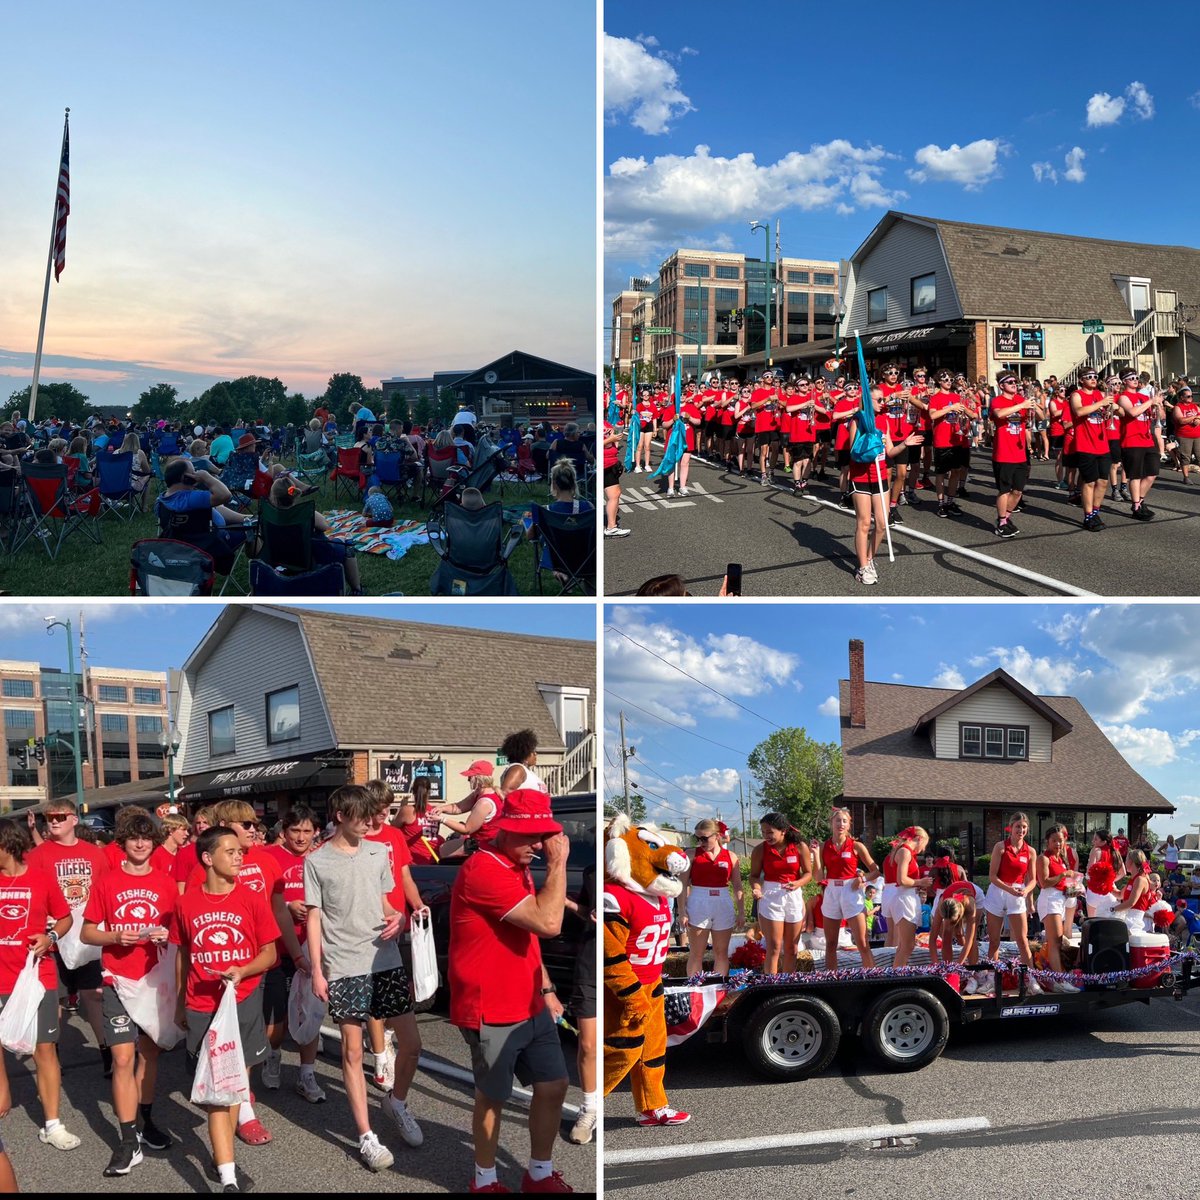 What a great day @FishersIN! ❤️ 
Parade 🎉         Concert 🎶
Drone light show & fireworks 🤩
Hope you enjoyed the day #FCEfish @FCEhse! #SparkFishers💙 #CelebrateCommunity